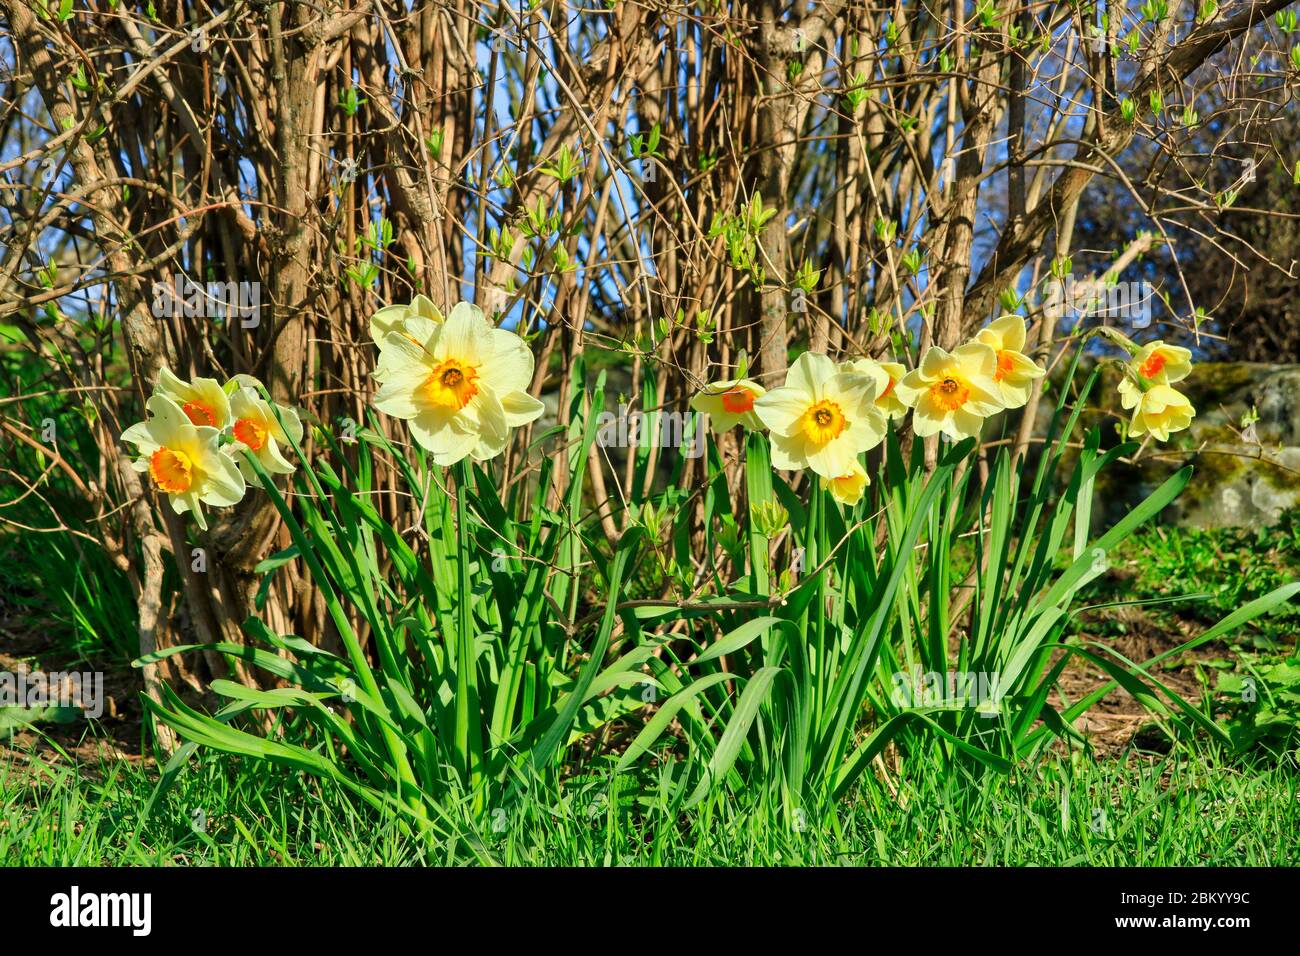 Daffodils, most likely Narcissus x incomparabilis, growing in the garden on a sunny day of spring. Stock Photo